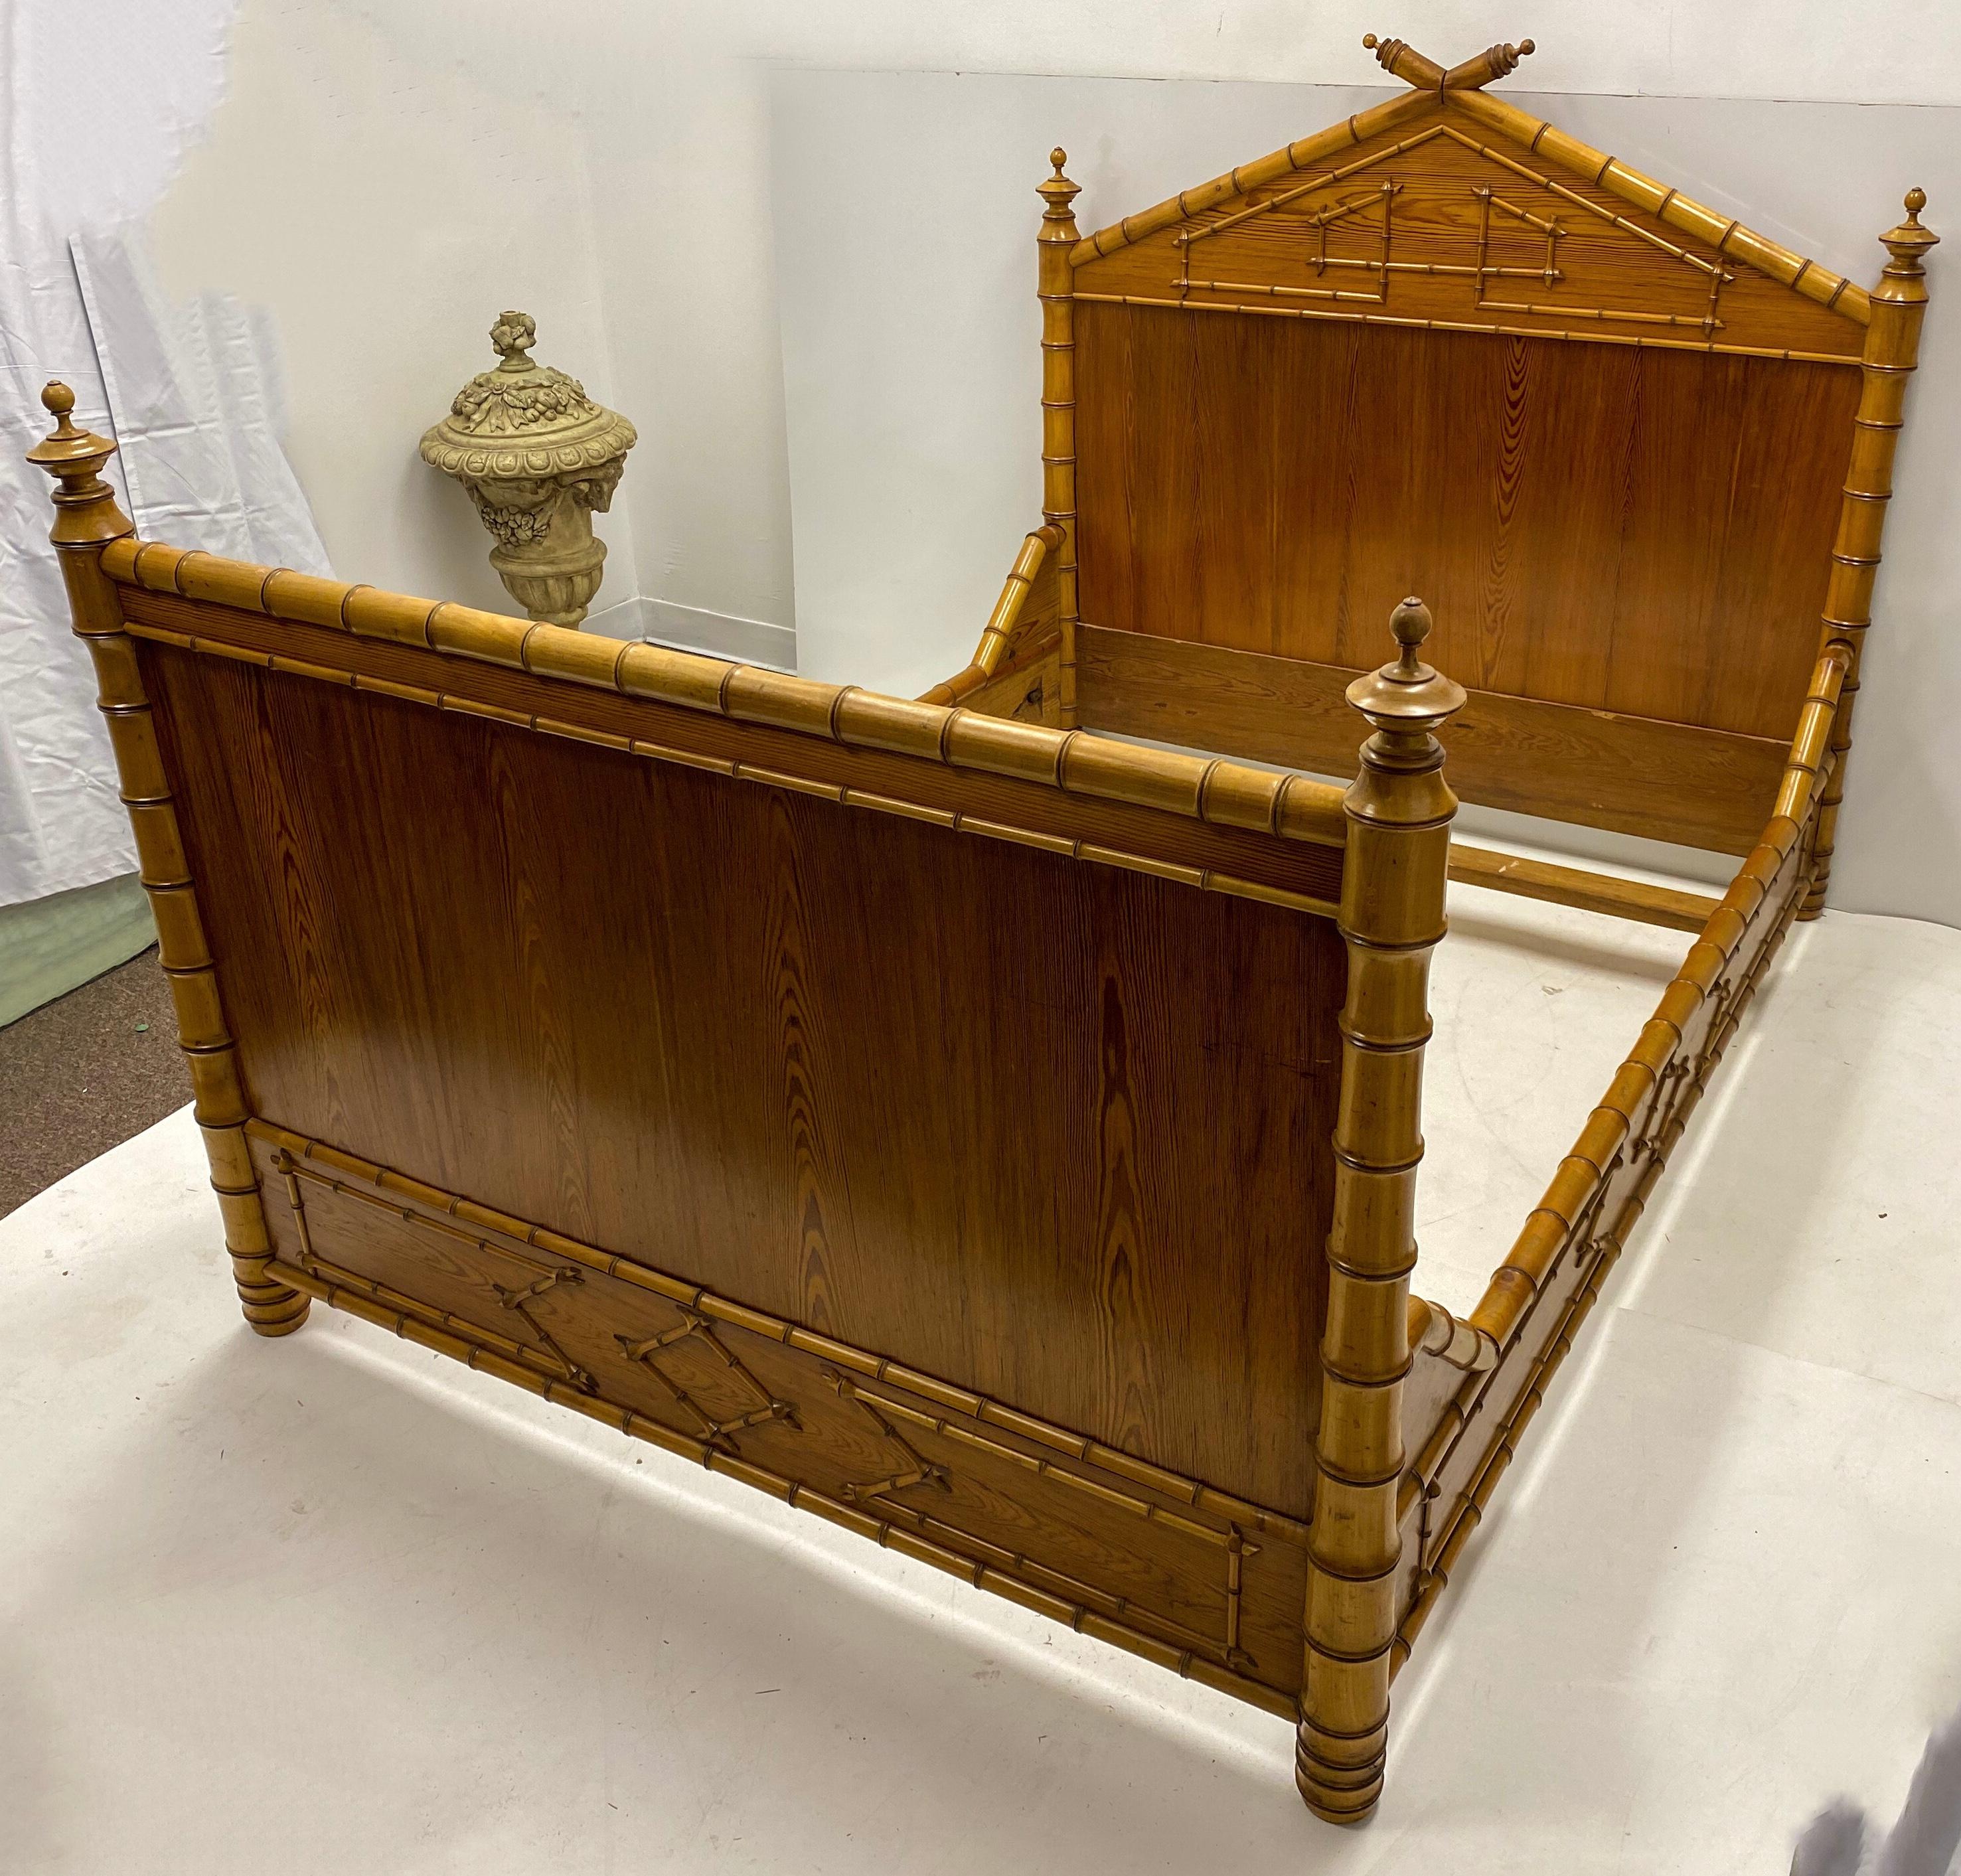 This is a 19th century French carved pine faux bamboo bed frame. It is European in size, which is closer to a full in the United States. The frame has a hard pine foundation with elaborate faux bamboo details.